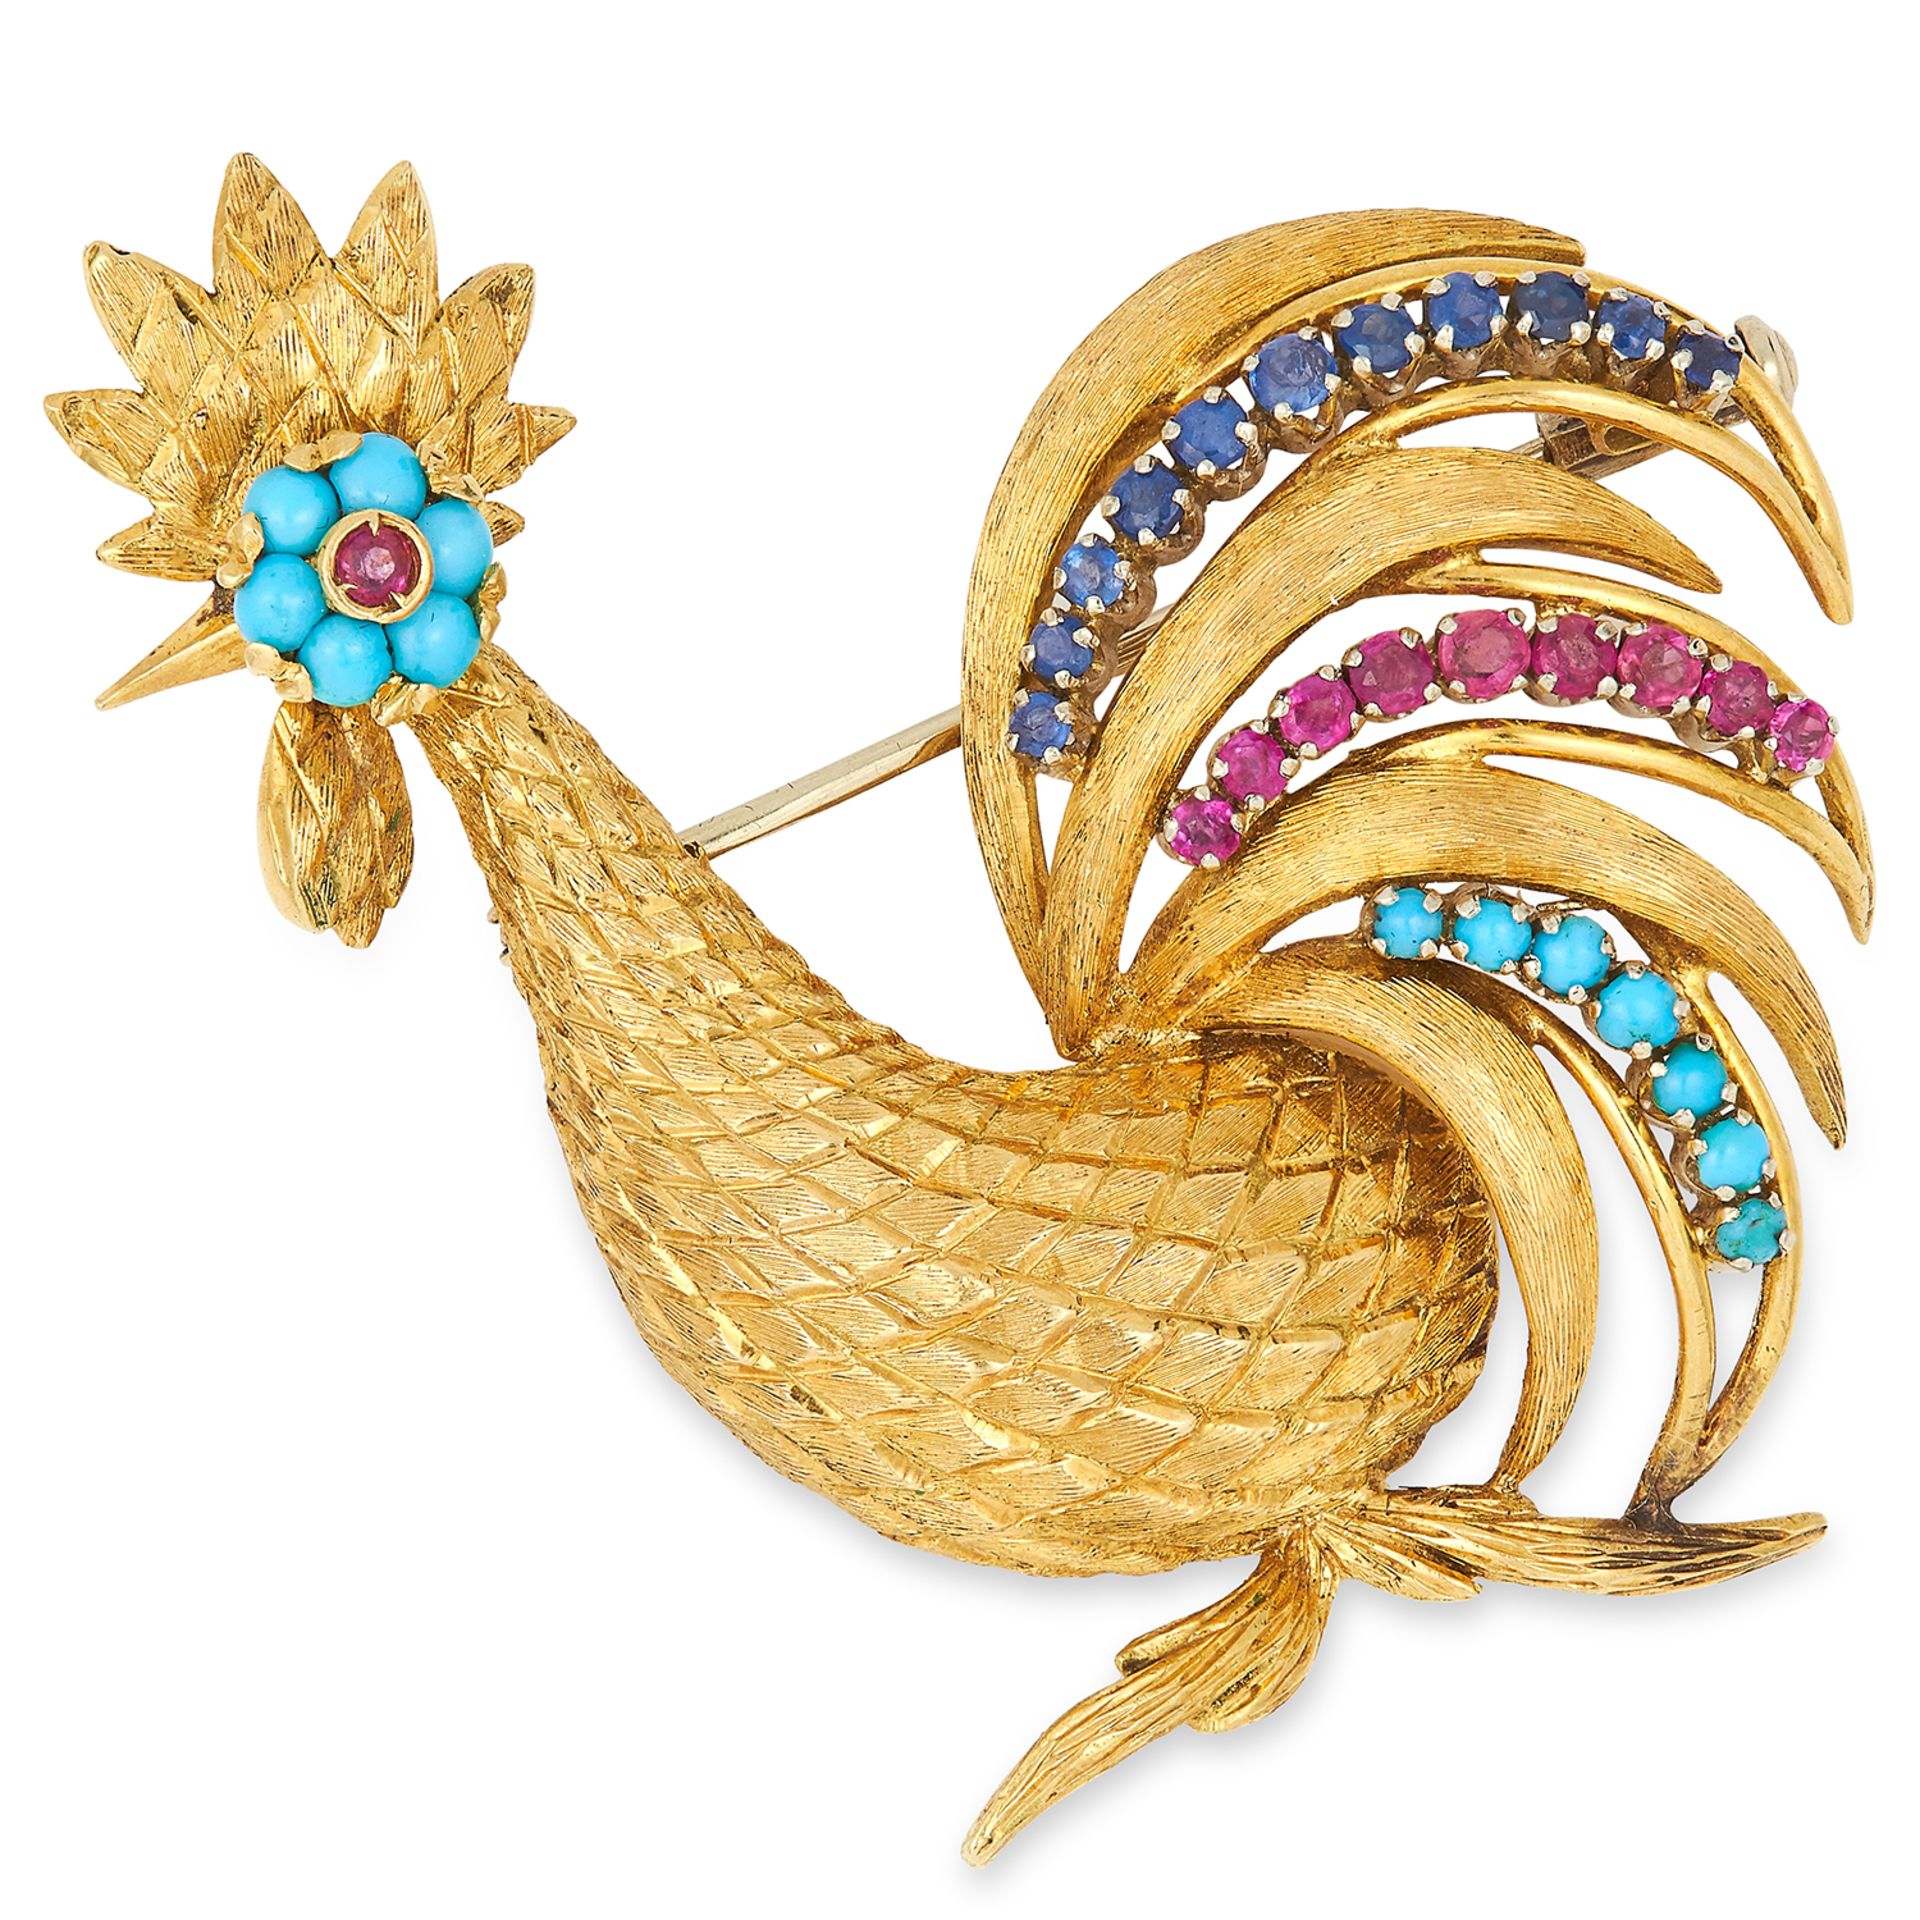 VINTAGE GEMSET COCKEREL BROOCH, set with cabochon turquoise, round cut rubies and round cut